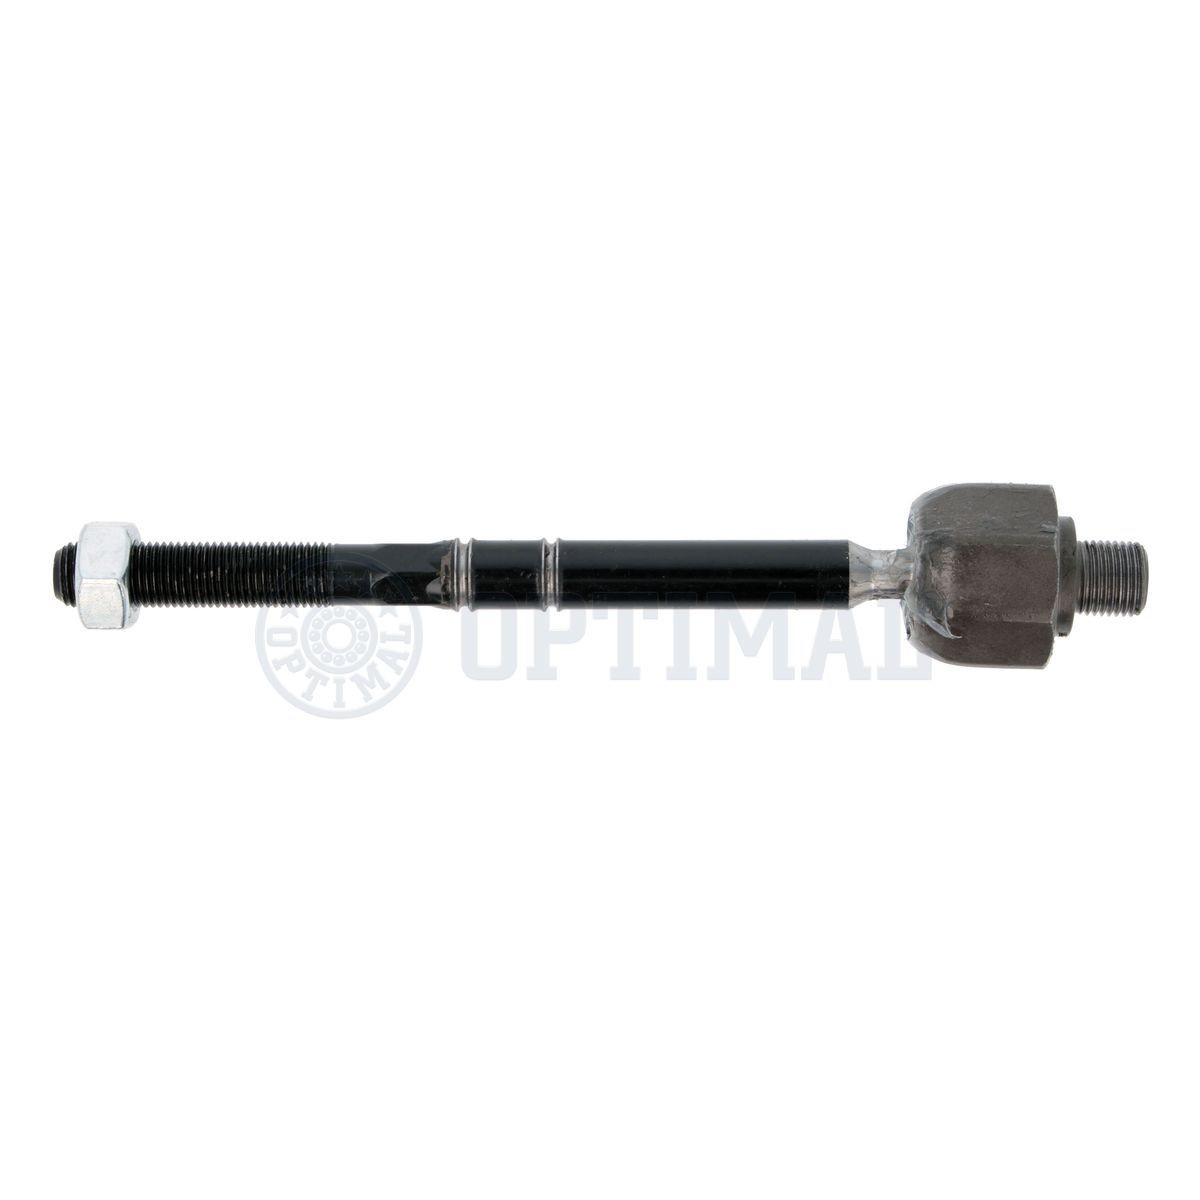 OPTIMAL Front Axle Left, Front Axle Right, M14 x 1,50 RHT M, 204 mm Length: 204mm Tie rod axle joint G2-2094 buy